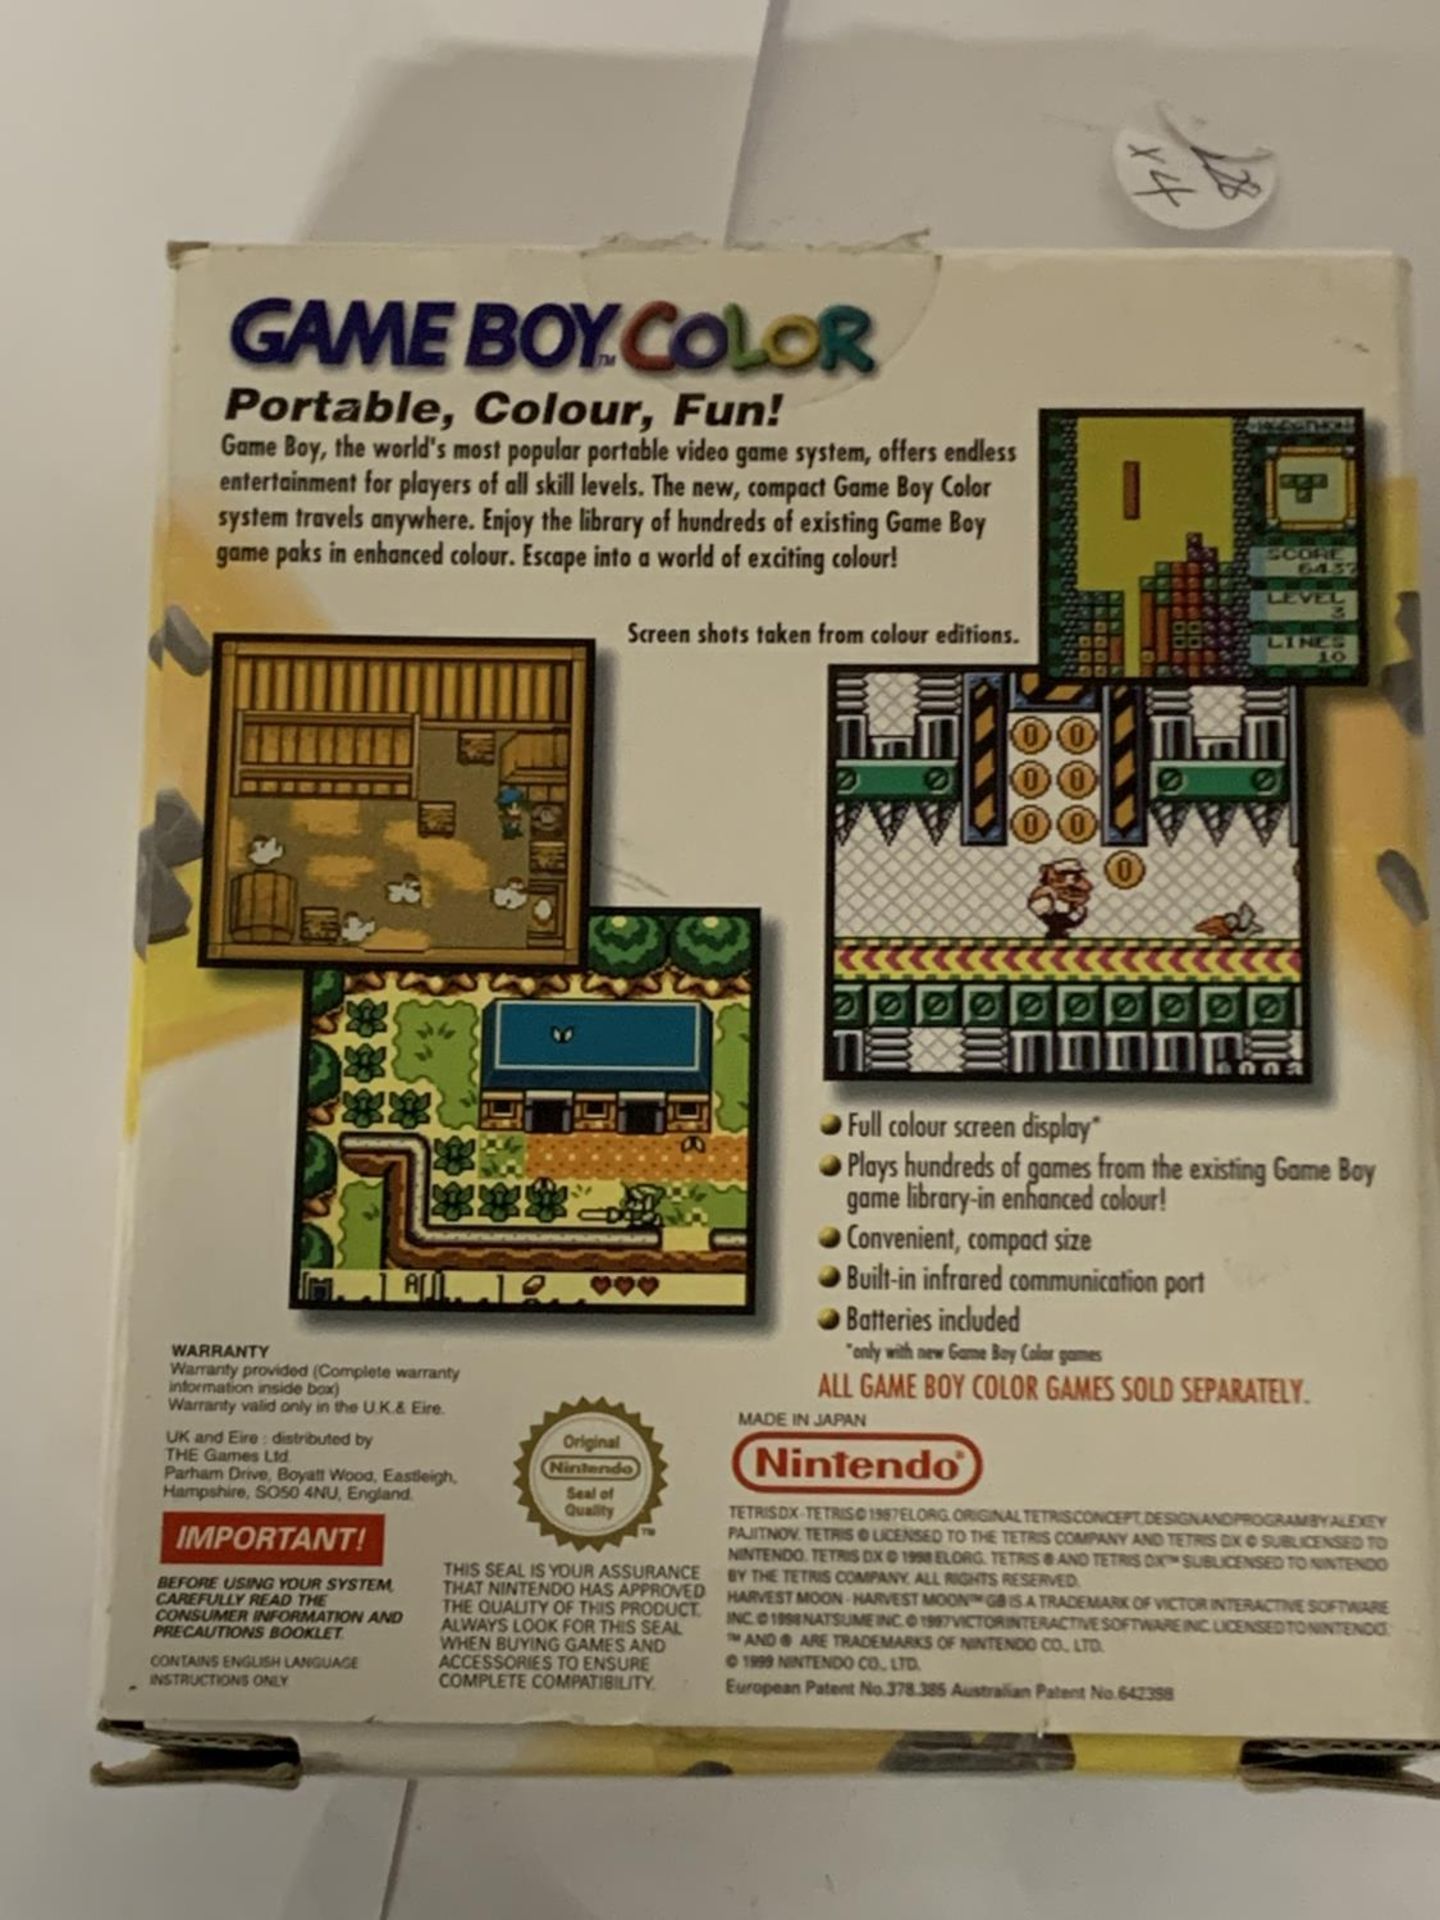 A BOXED GAMEBOY COLOR PORTABLE HANDHELD - Image 4 of 4